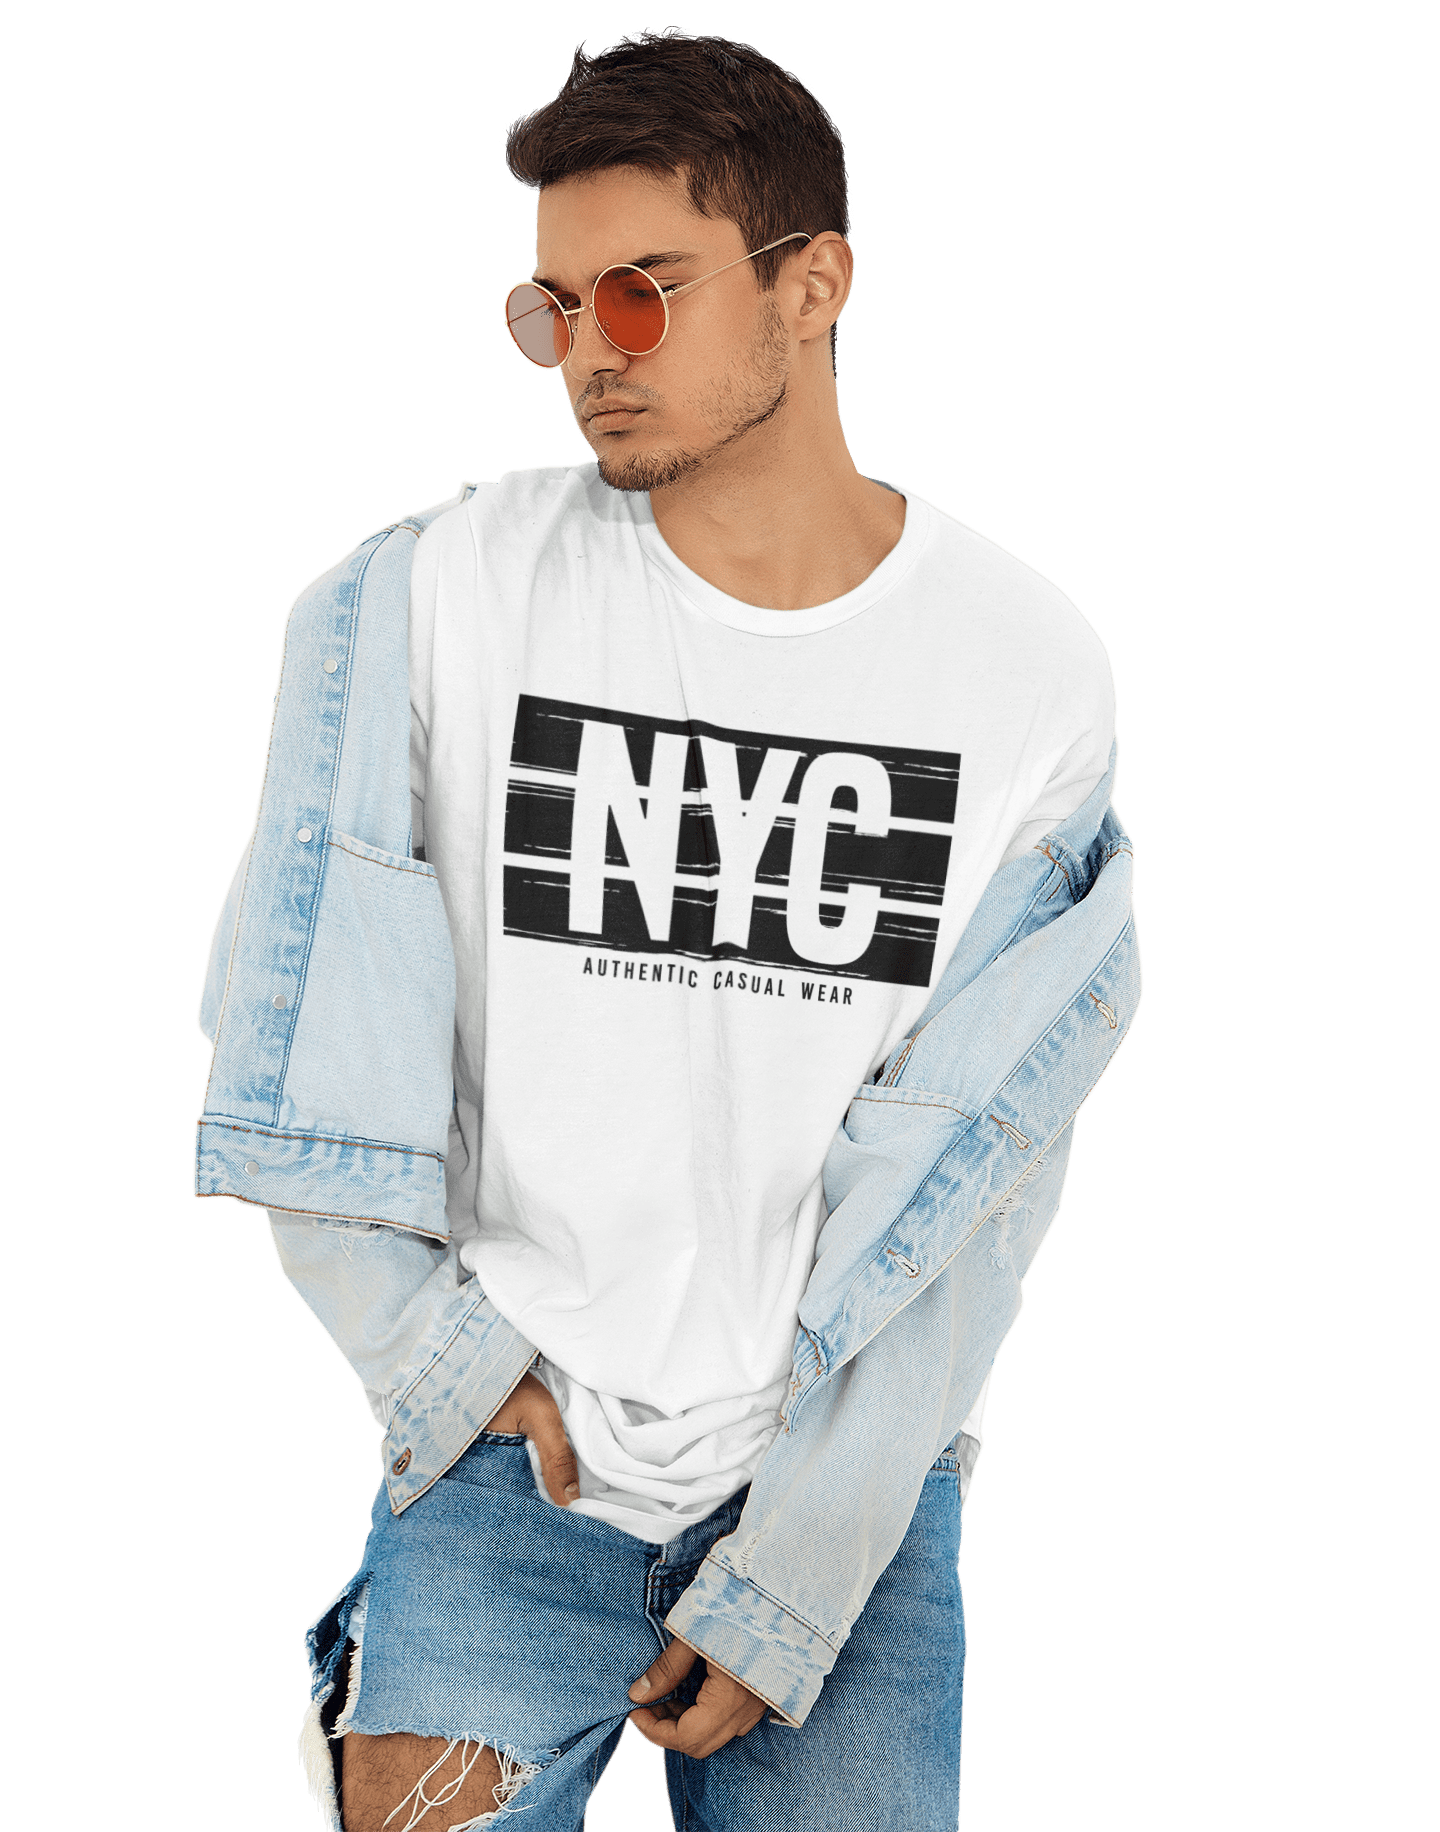 kaos nyc authentic casual wear